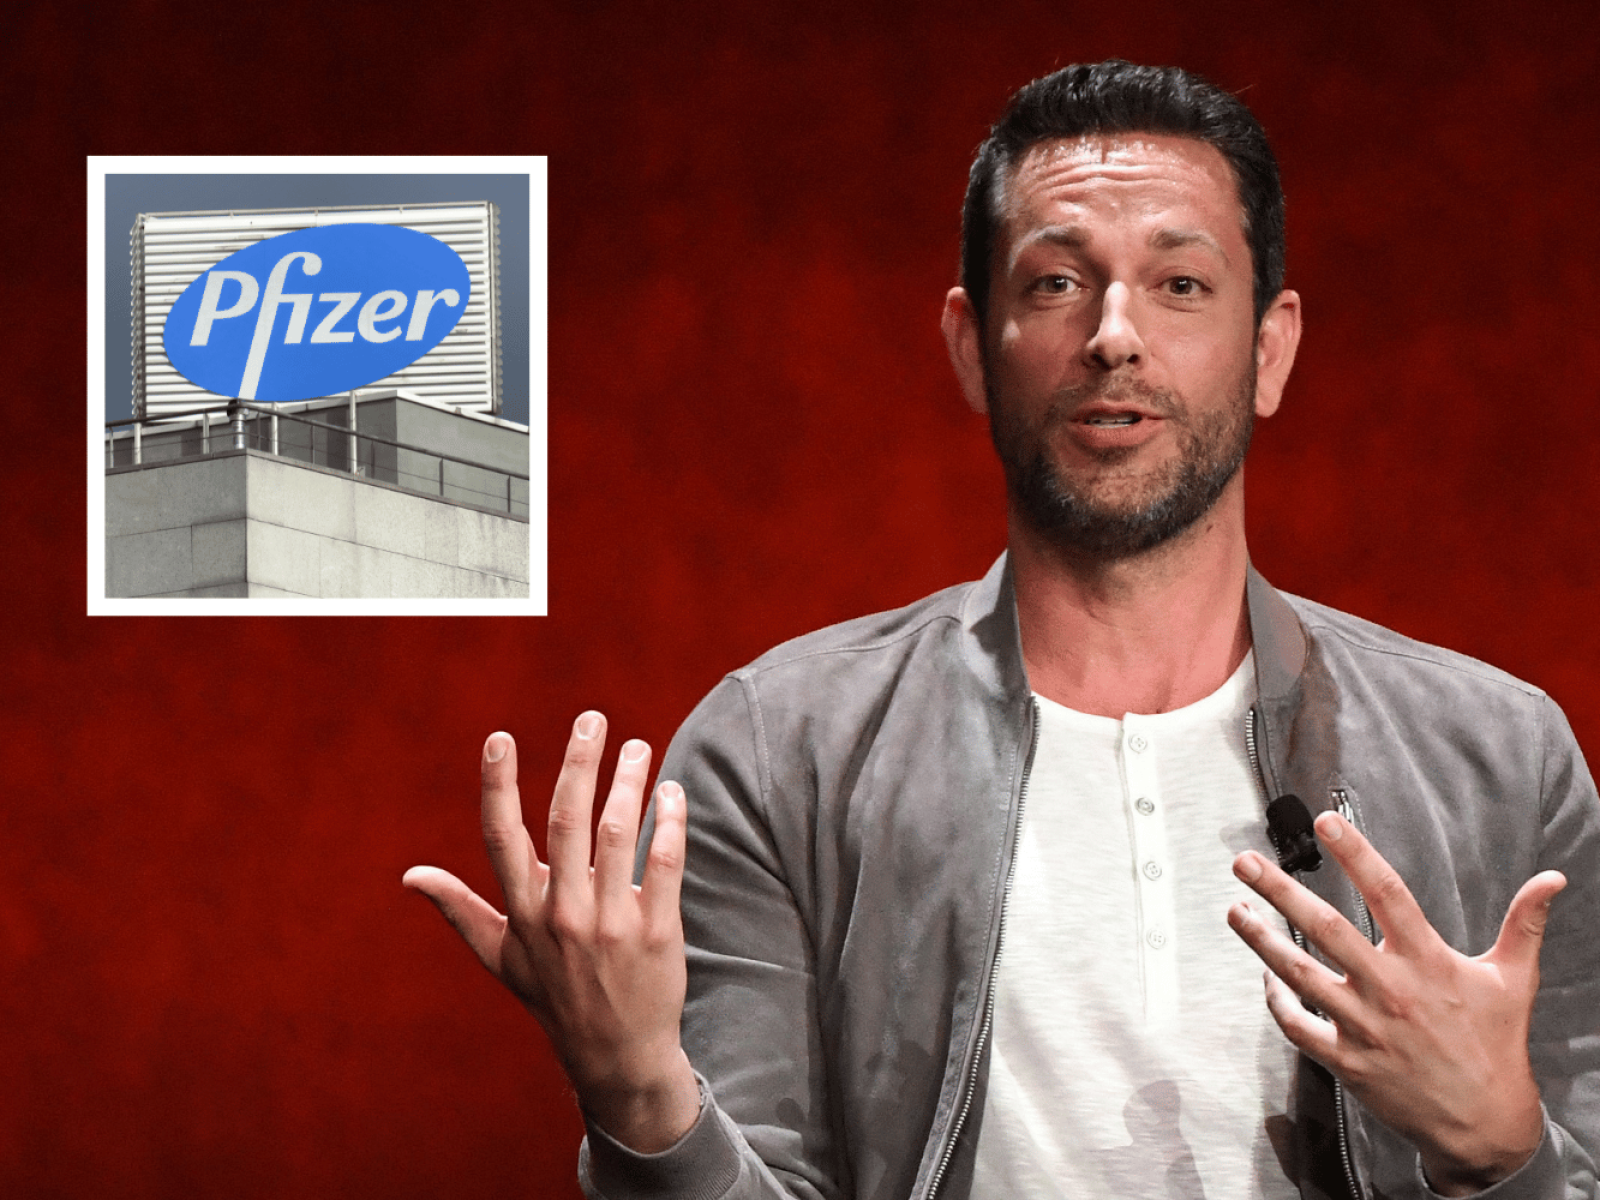 Fans Thinks Zachary Just His Career With Anti-Pfizer Tweet